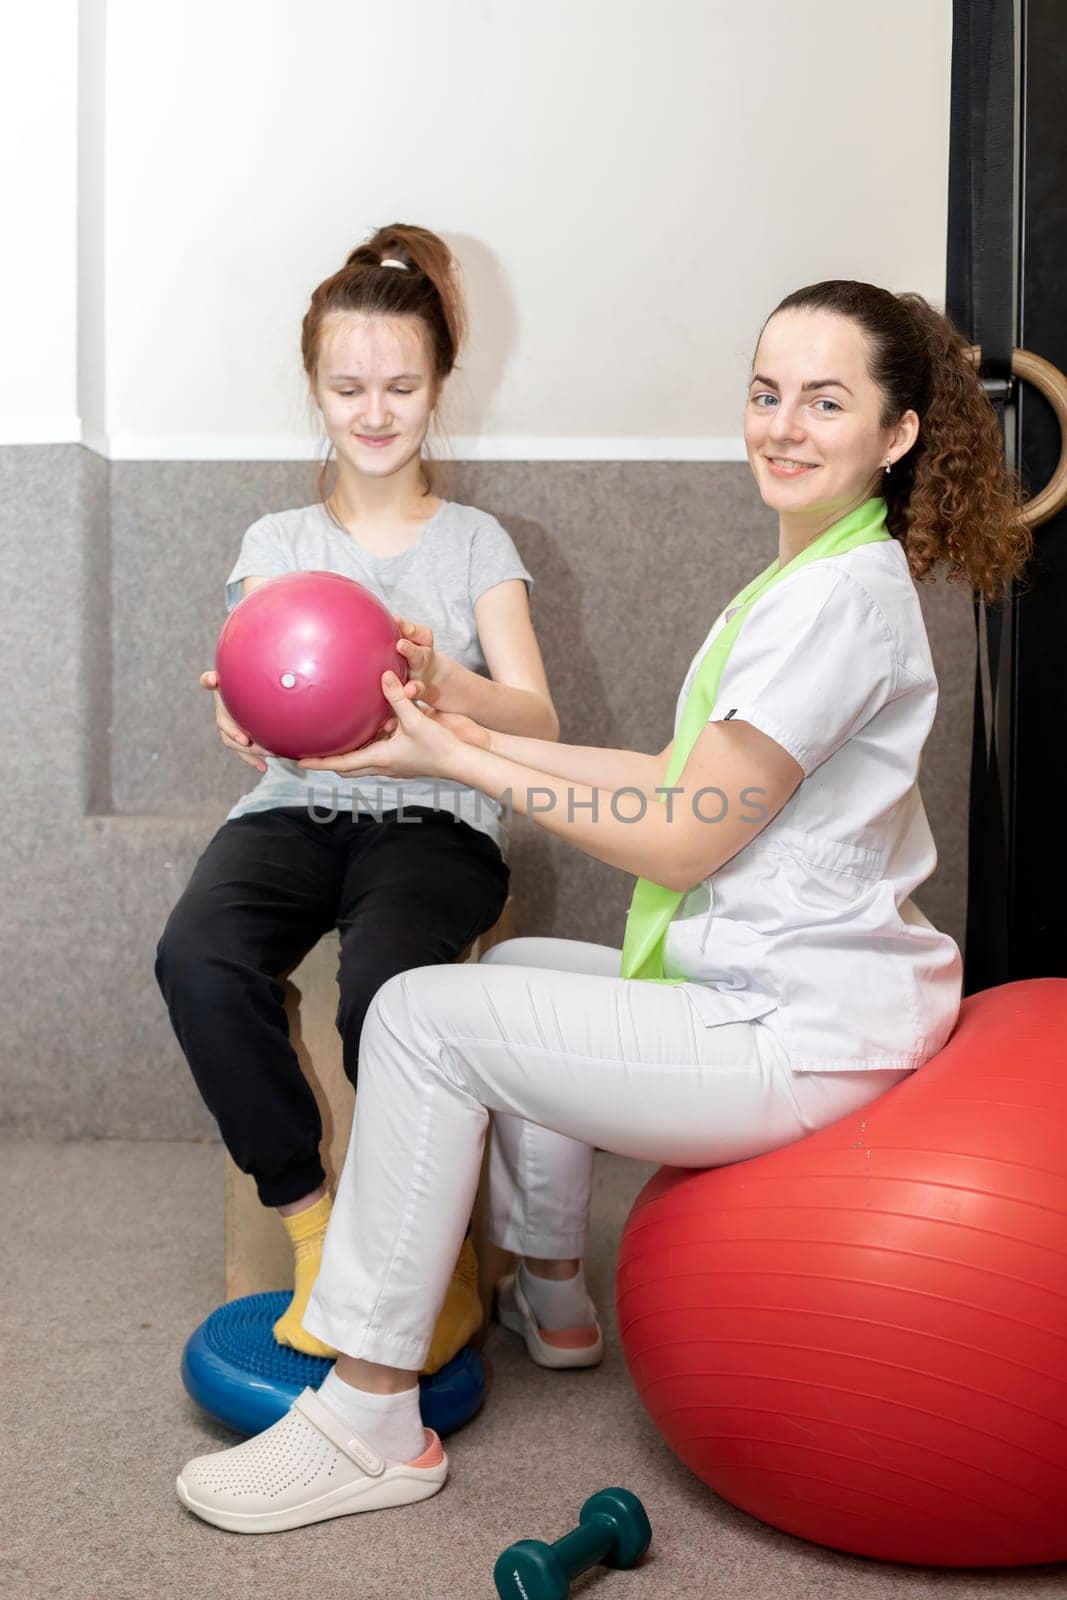 Smiling Child, Teenage Girl With Disability Does Physical Exercises With Support Of Rehabilitation Specialist, Physical Therapist. Rehabilitation. Musculoskeletal Disorder. Vertical plane.